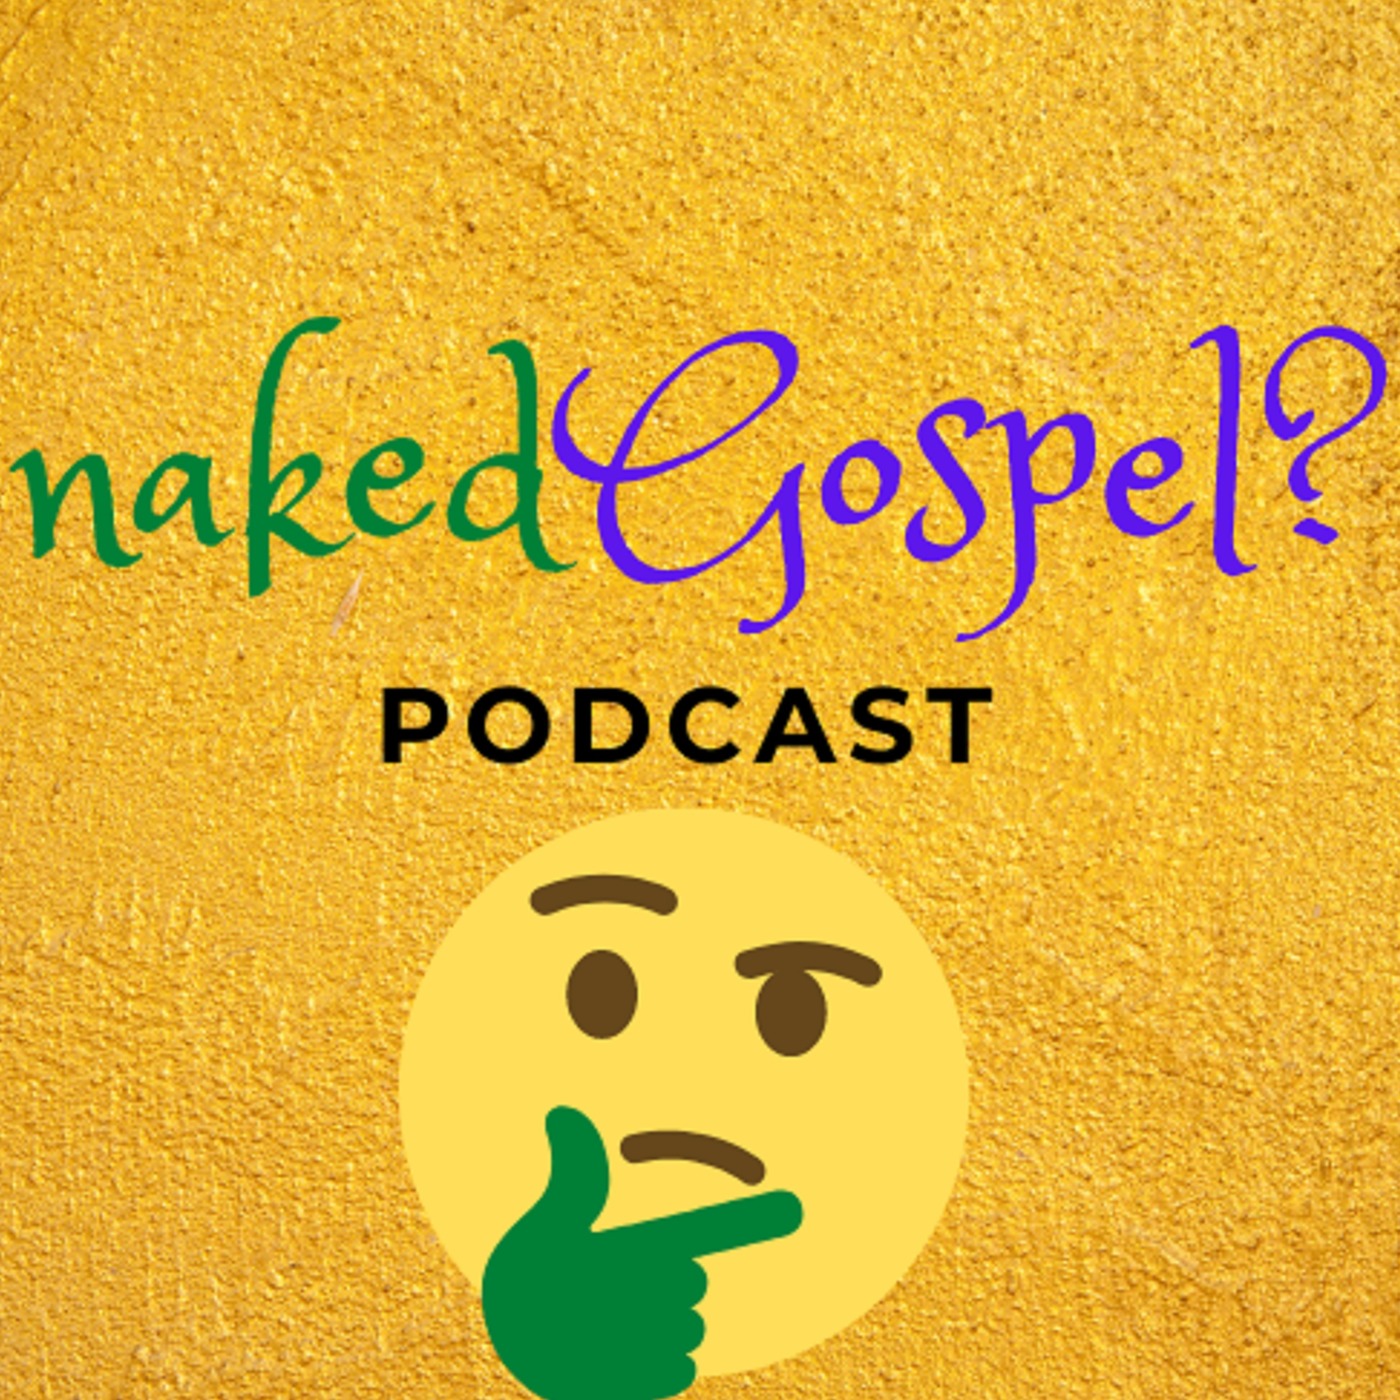 Episode 2 - An Unexpected Journey of Faith without Gandalf or Hobbits